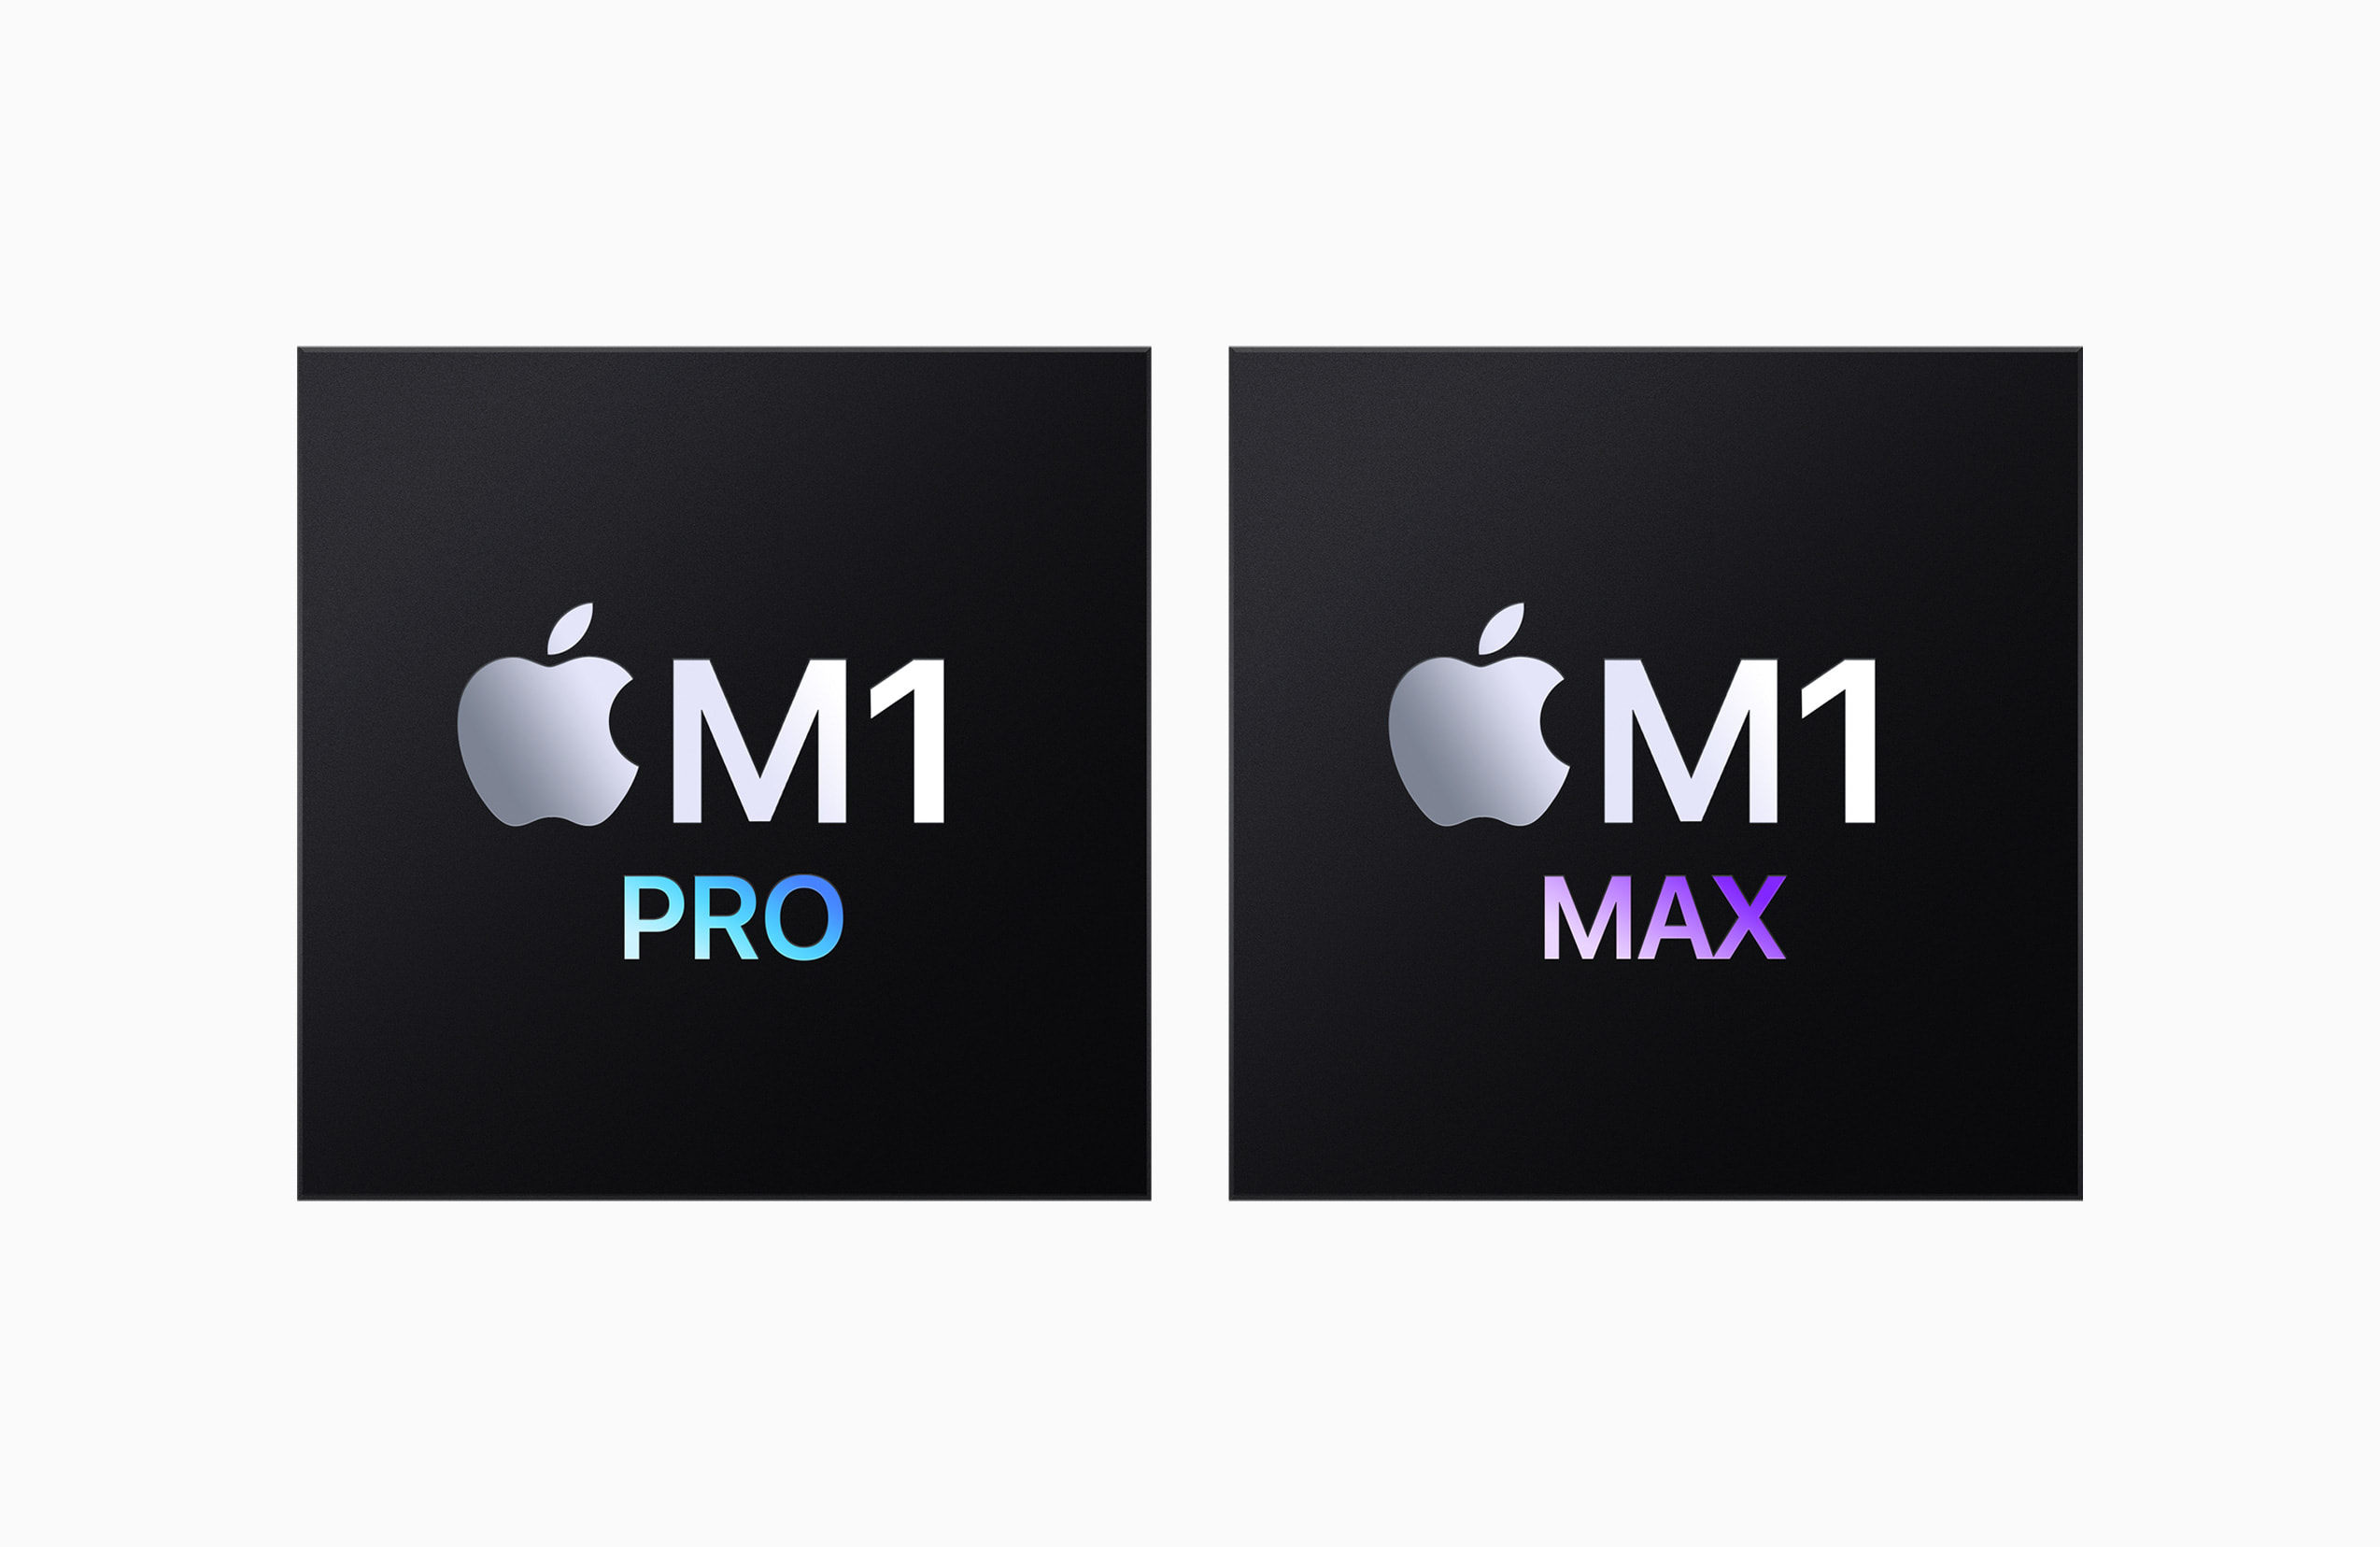 overskæg Vær forsigtig hydrogen Introducing M1 Pro and M1 Max: the most powerful chips Apple has ever built  - Apple